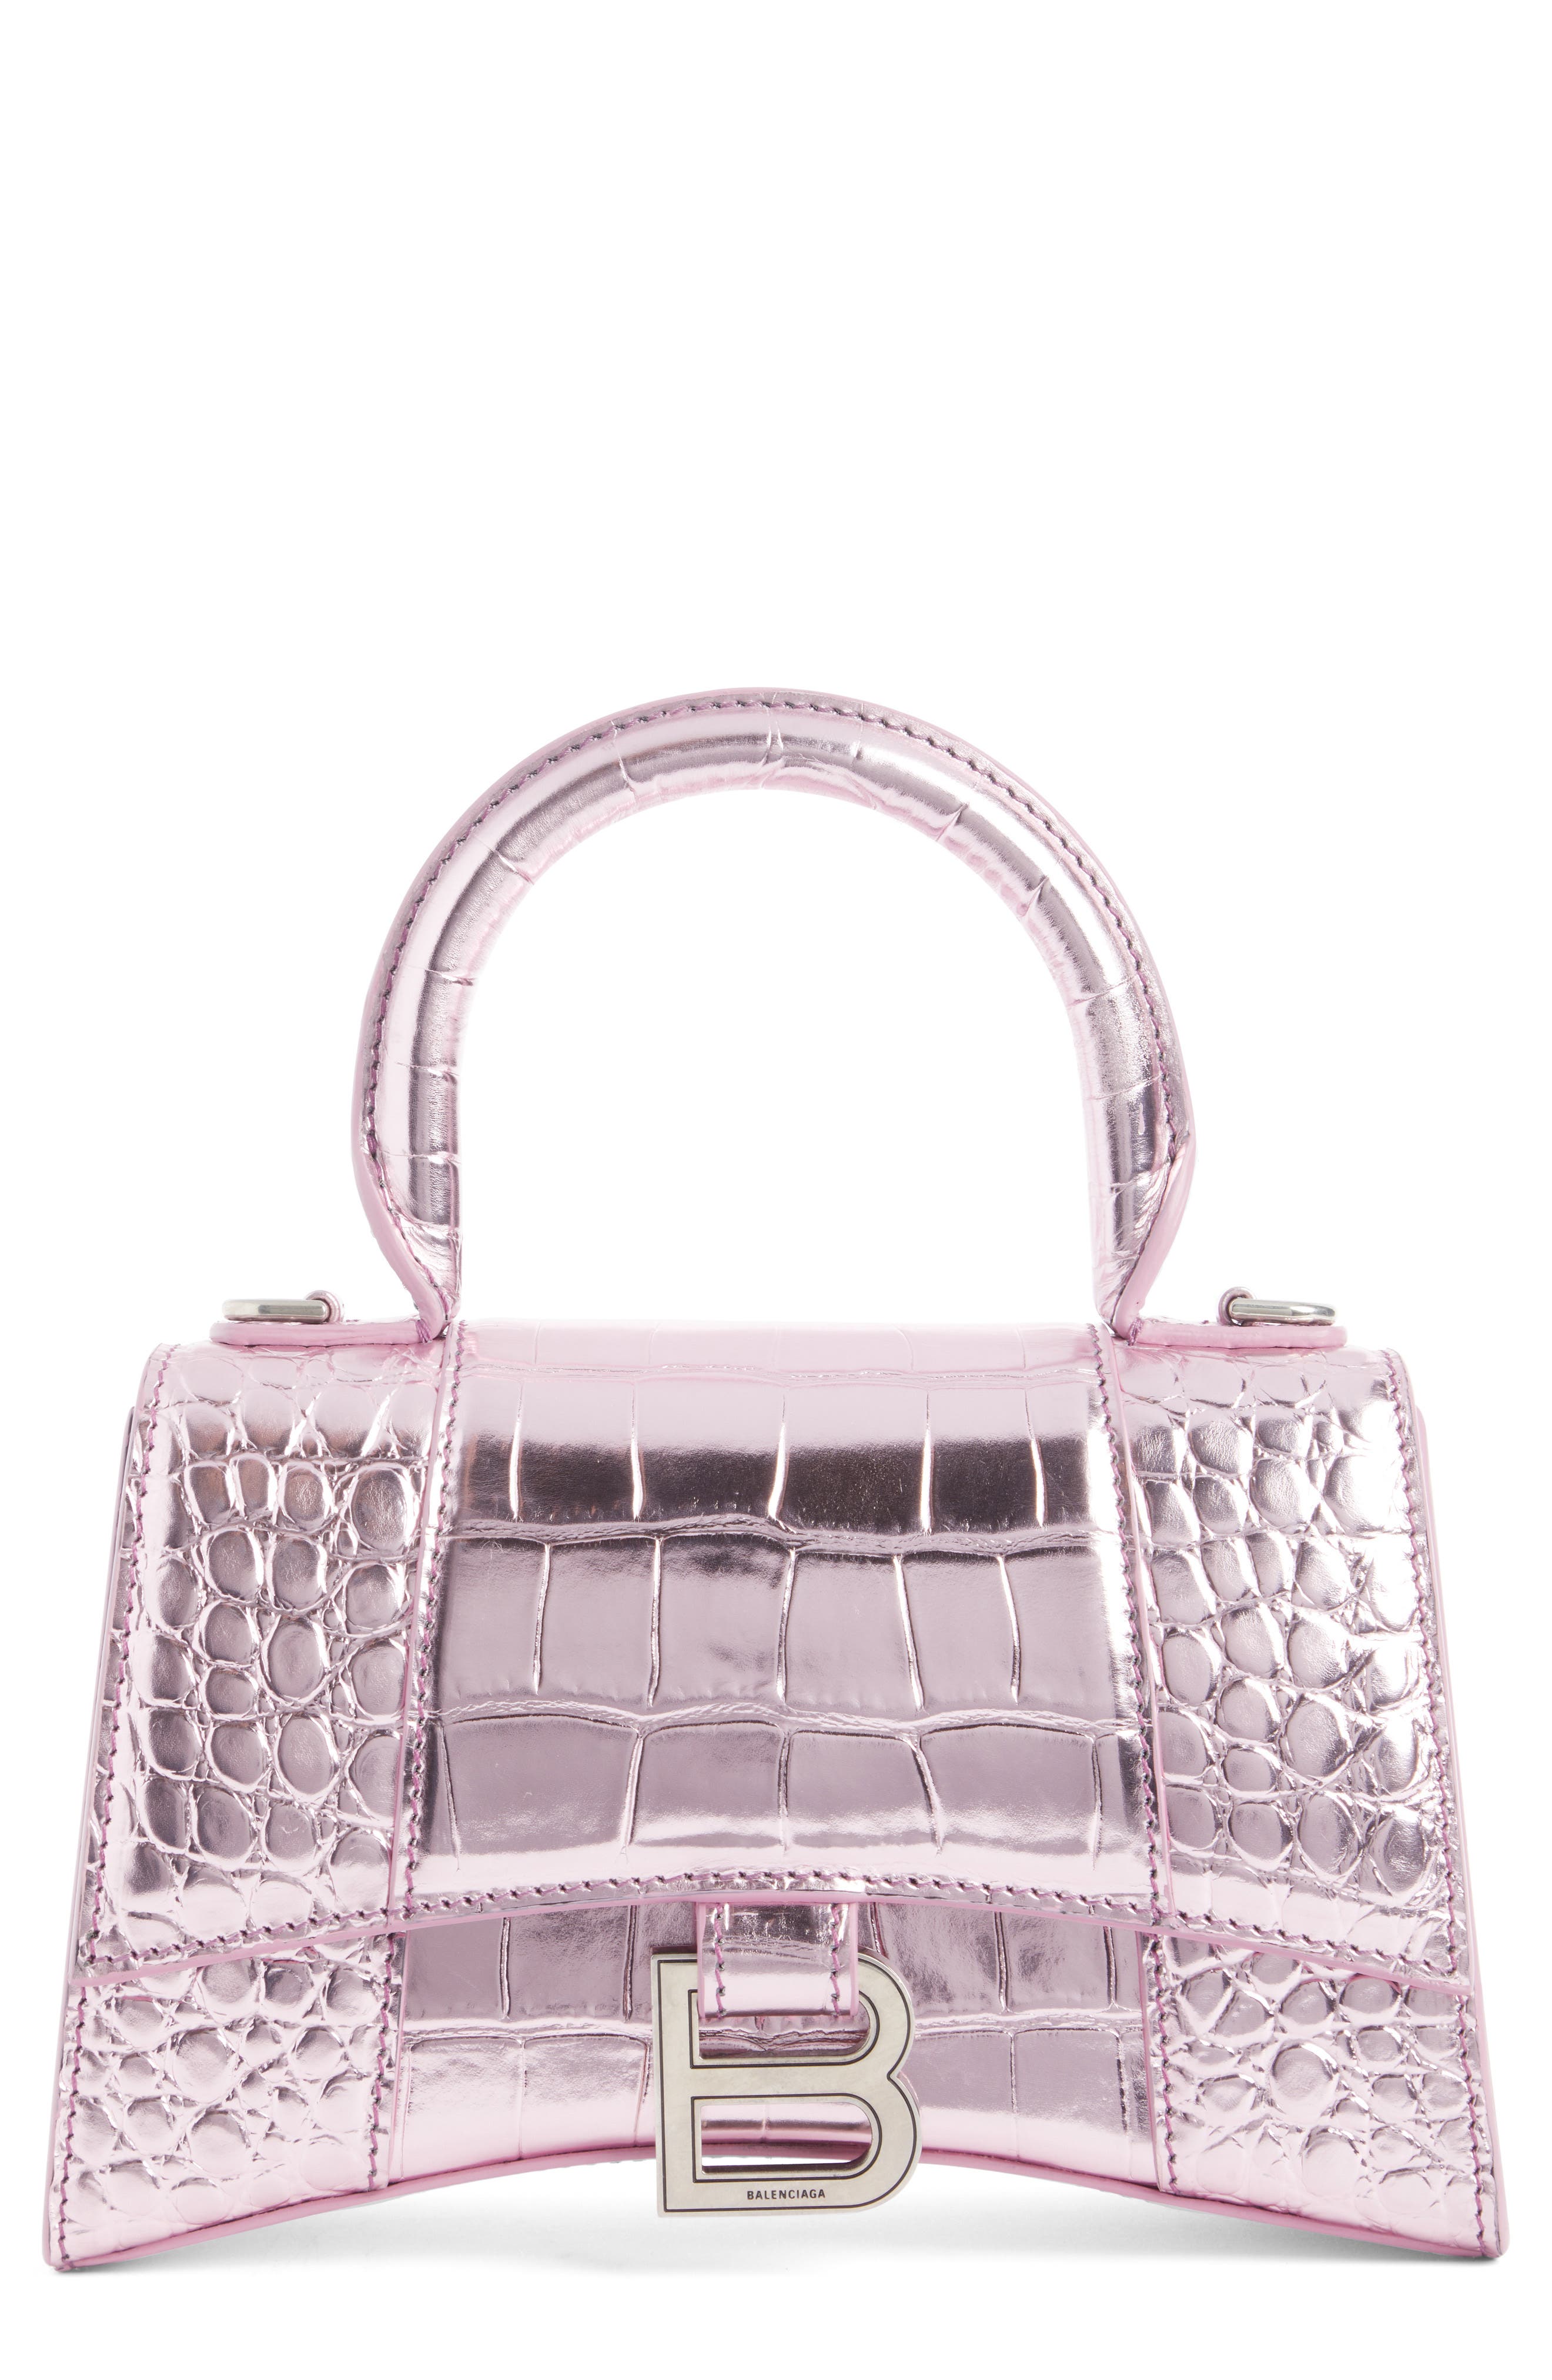 Balenciaga Extra Small Hourglass Metallic Leather Top Handle Bag in Pink at Nordstrom